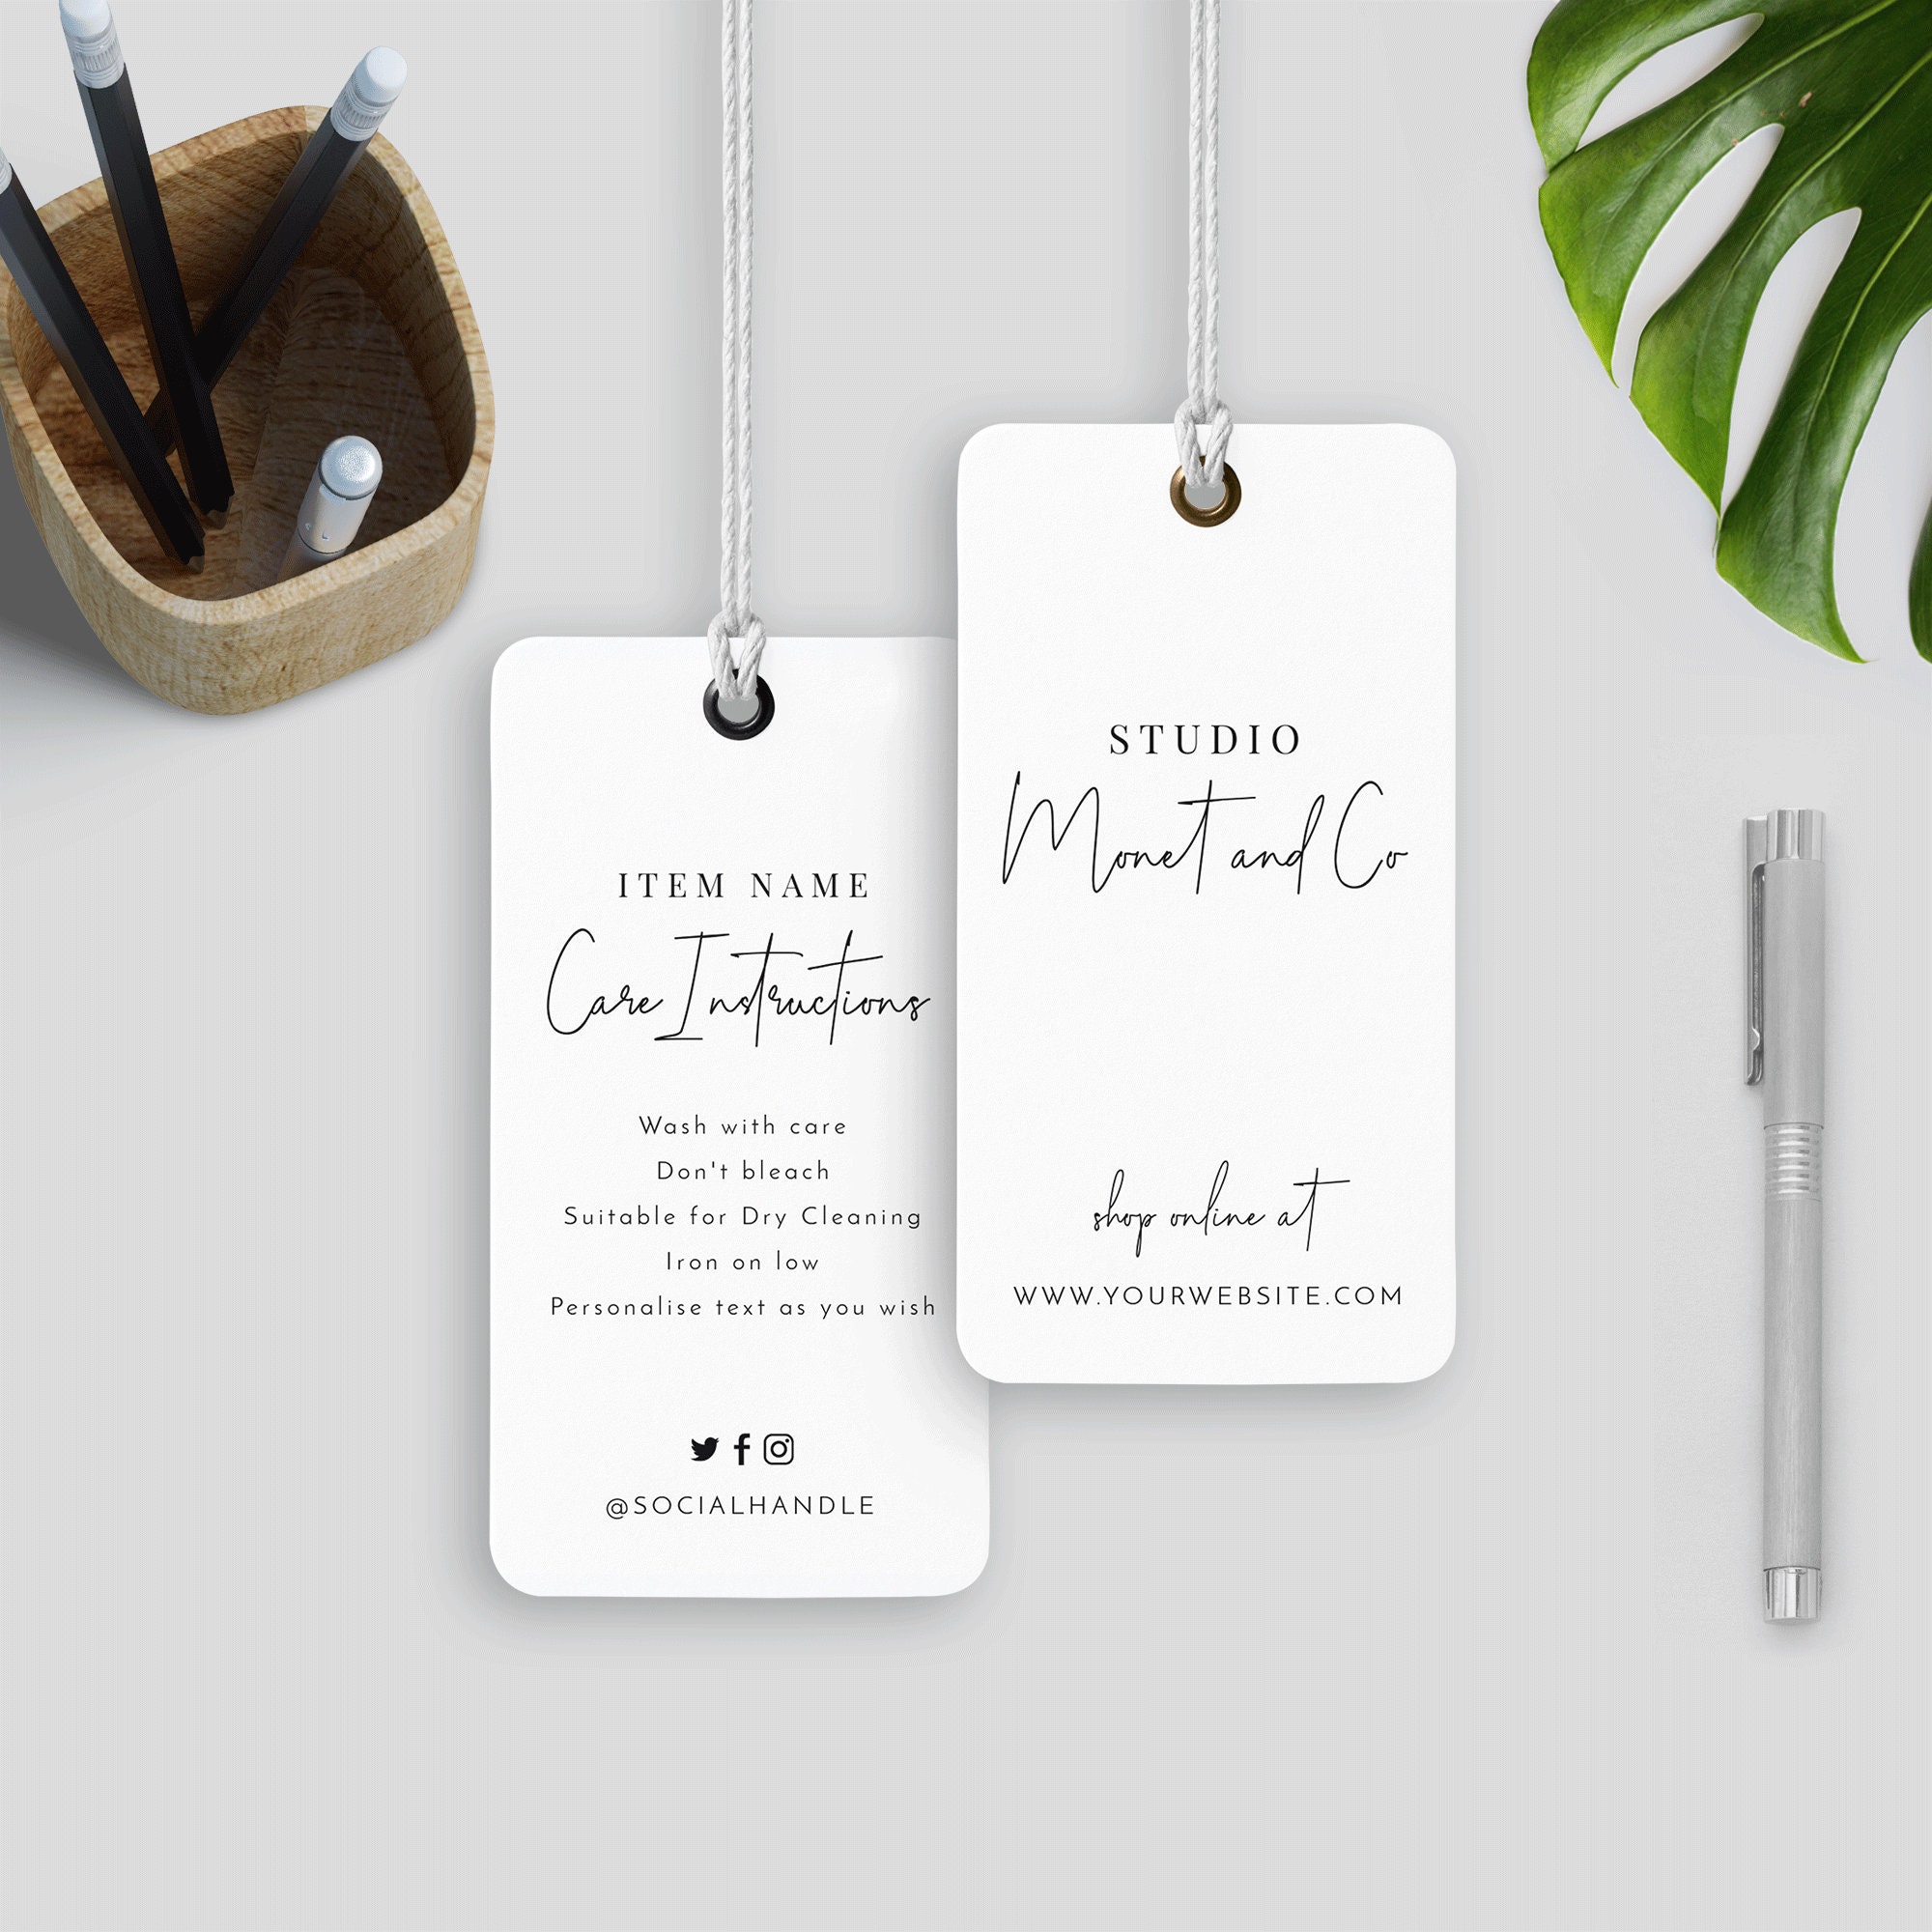 PRINTABLE Price Tag / Hang Tag 6PC Sticker Bundle Bold Style Downloadable  PDF DIY Labels for Handmade and Small Business Modern Tags 